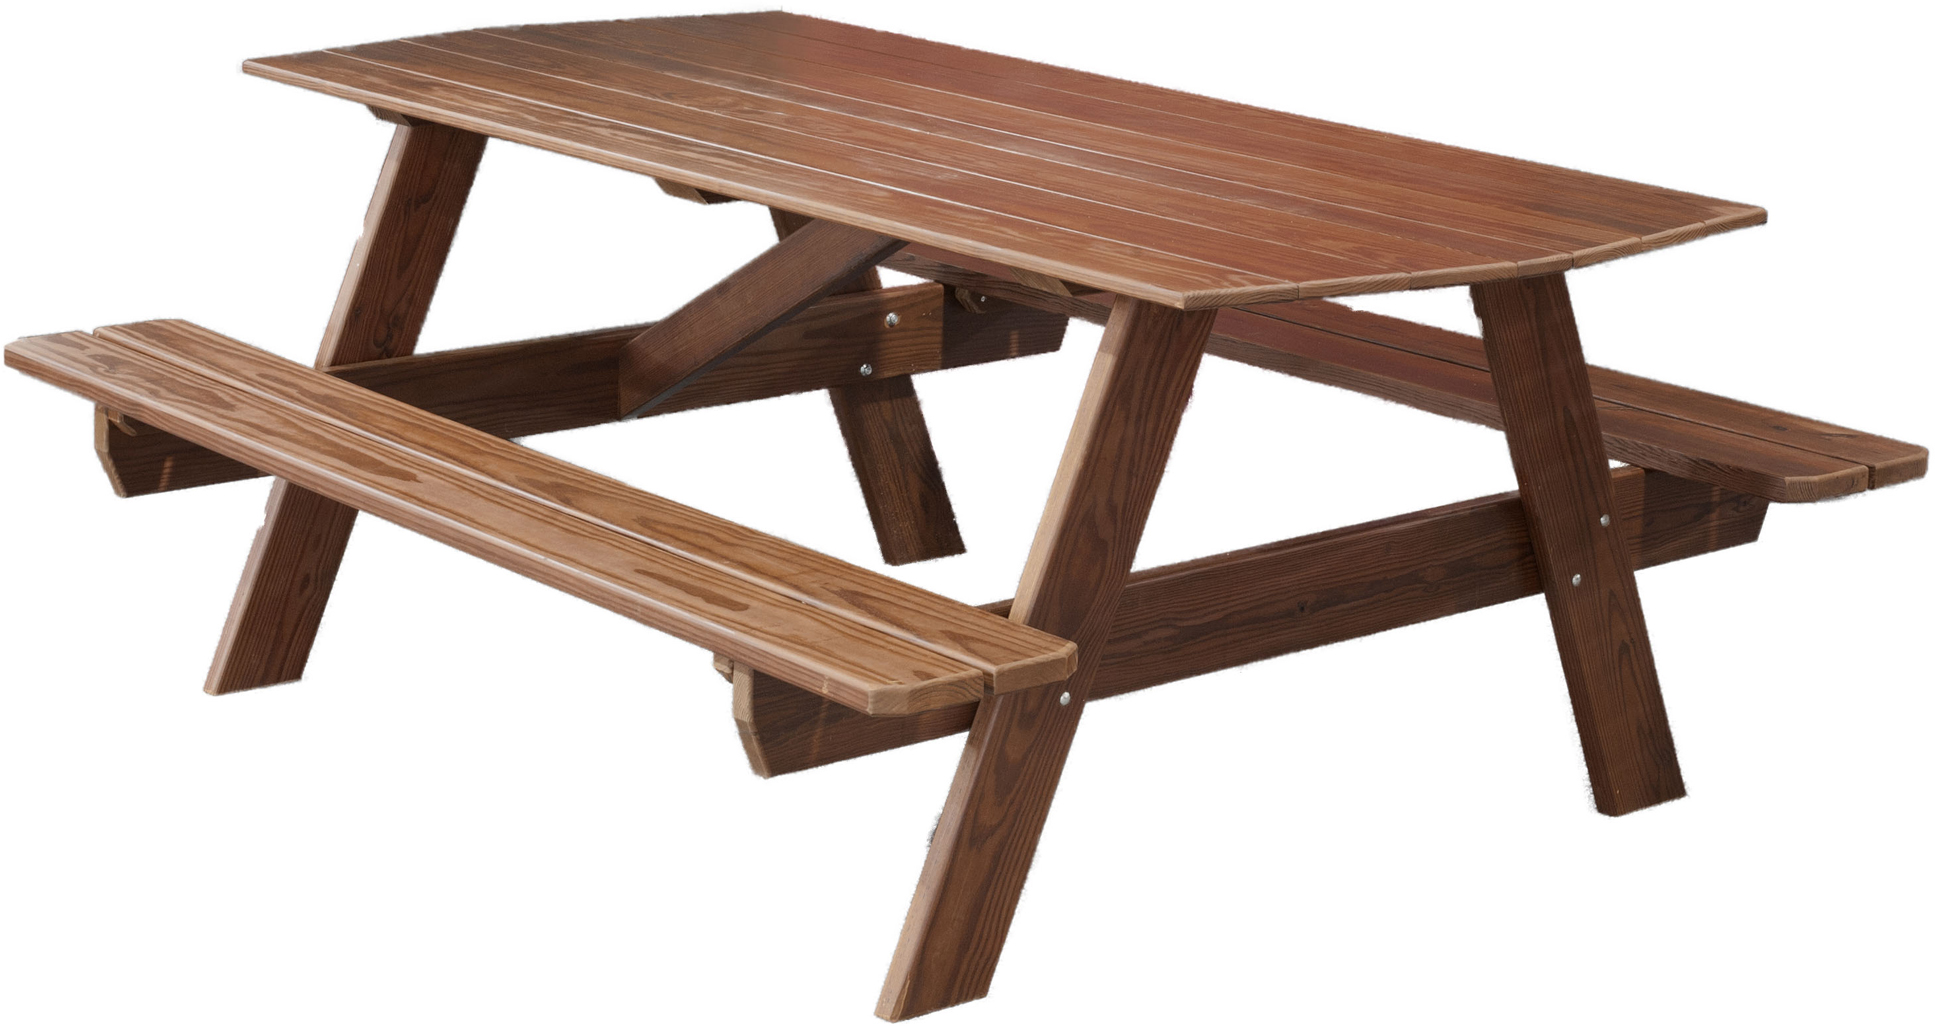 6 foot picnic kitchen table